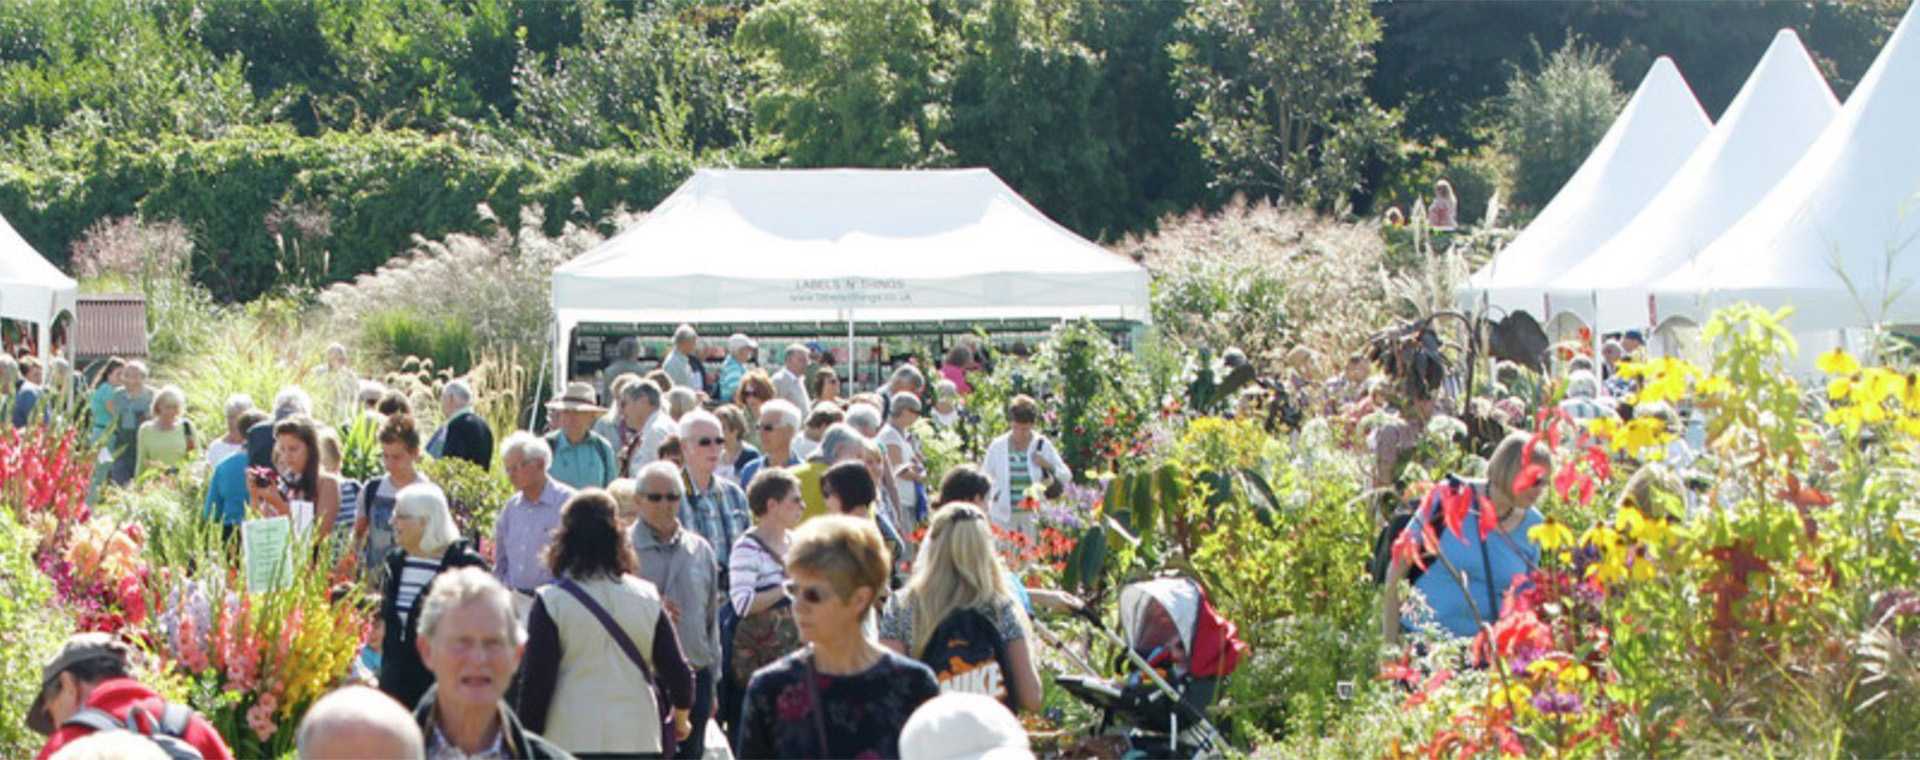 Crowds at a flower show